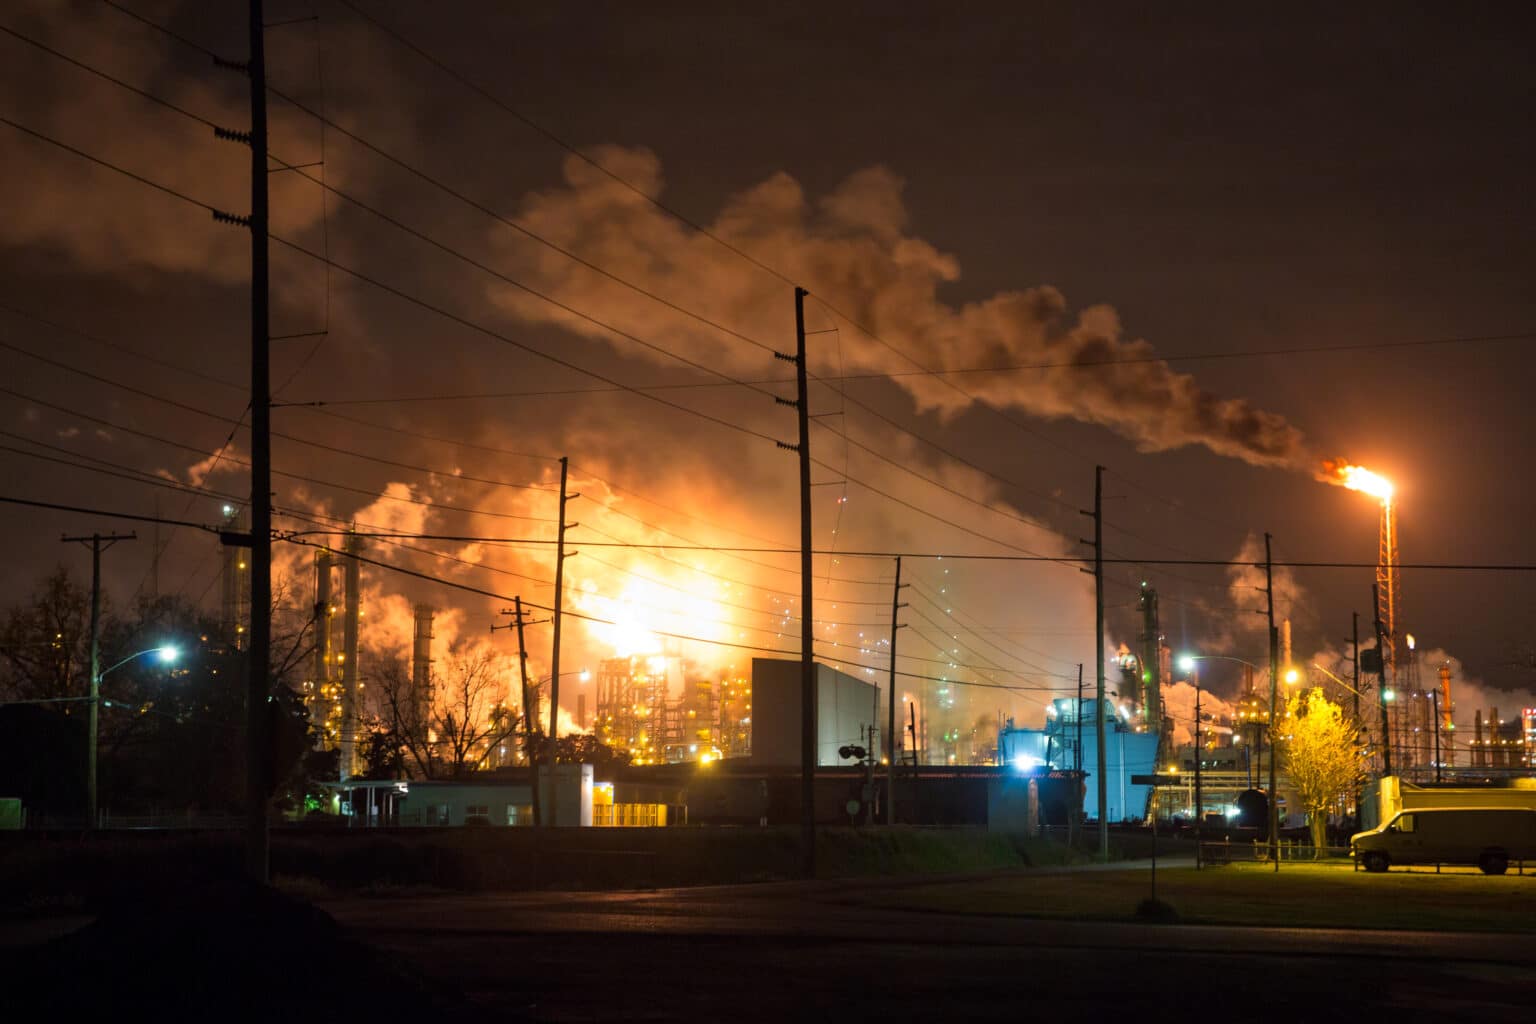 A bright fiery flare lights up a smokey sky over the industrial site of a Shell refinery.